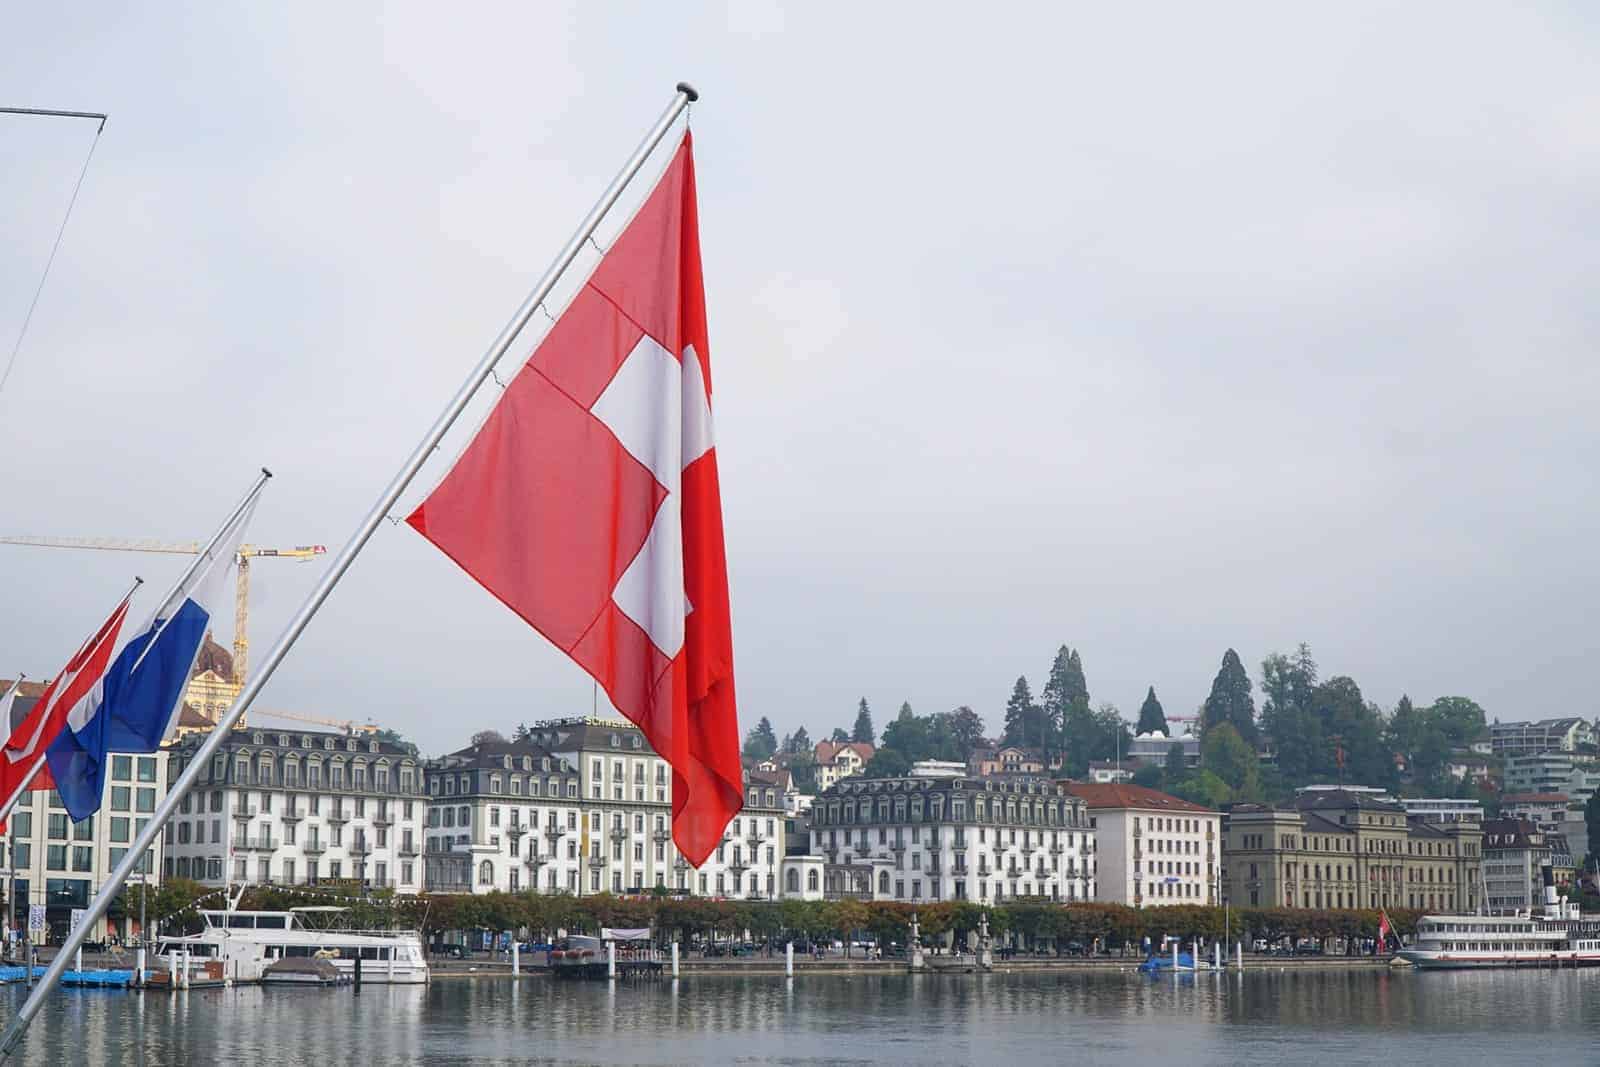 Swiss National Bank Owns No Bitcoin, but Could Buy in the Future, Chair Says